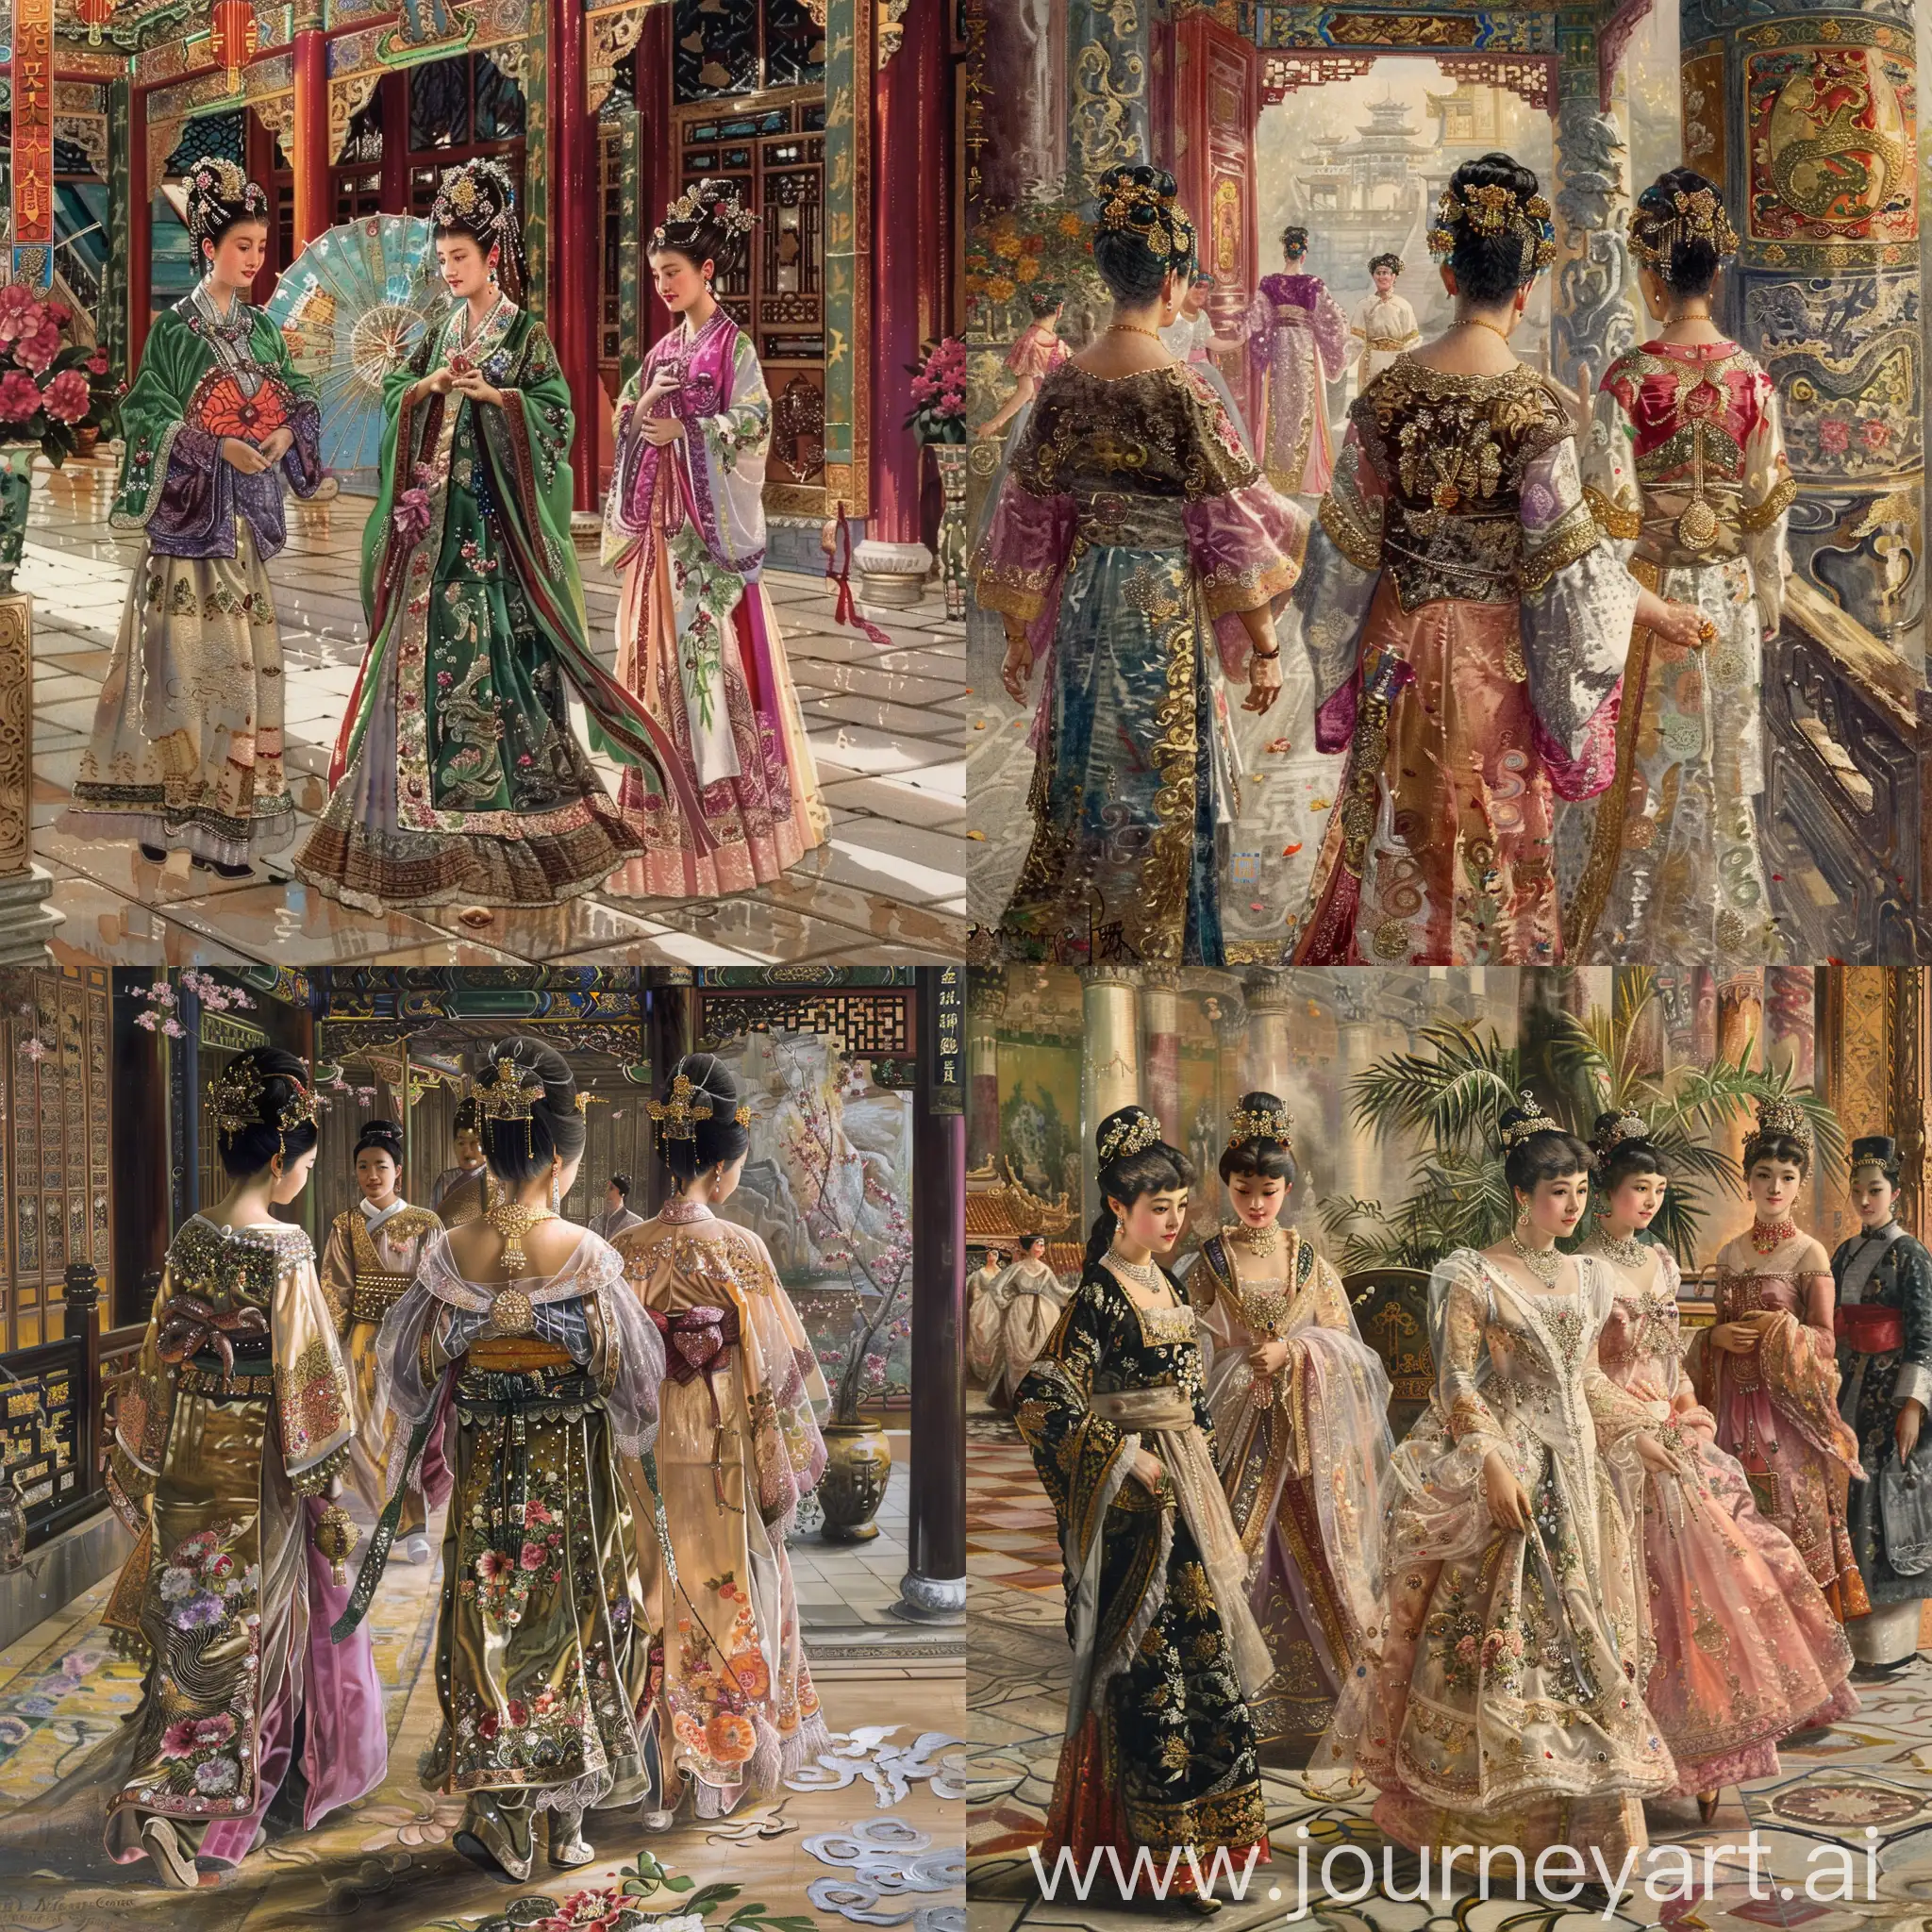 Empress-Dowager-Cixi-Walking-with-Maids-Opulent-Attire-and-Regal-Assistance